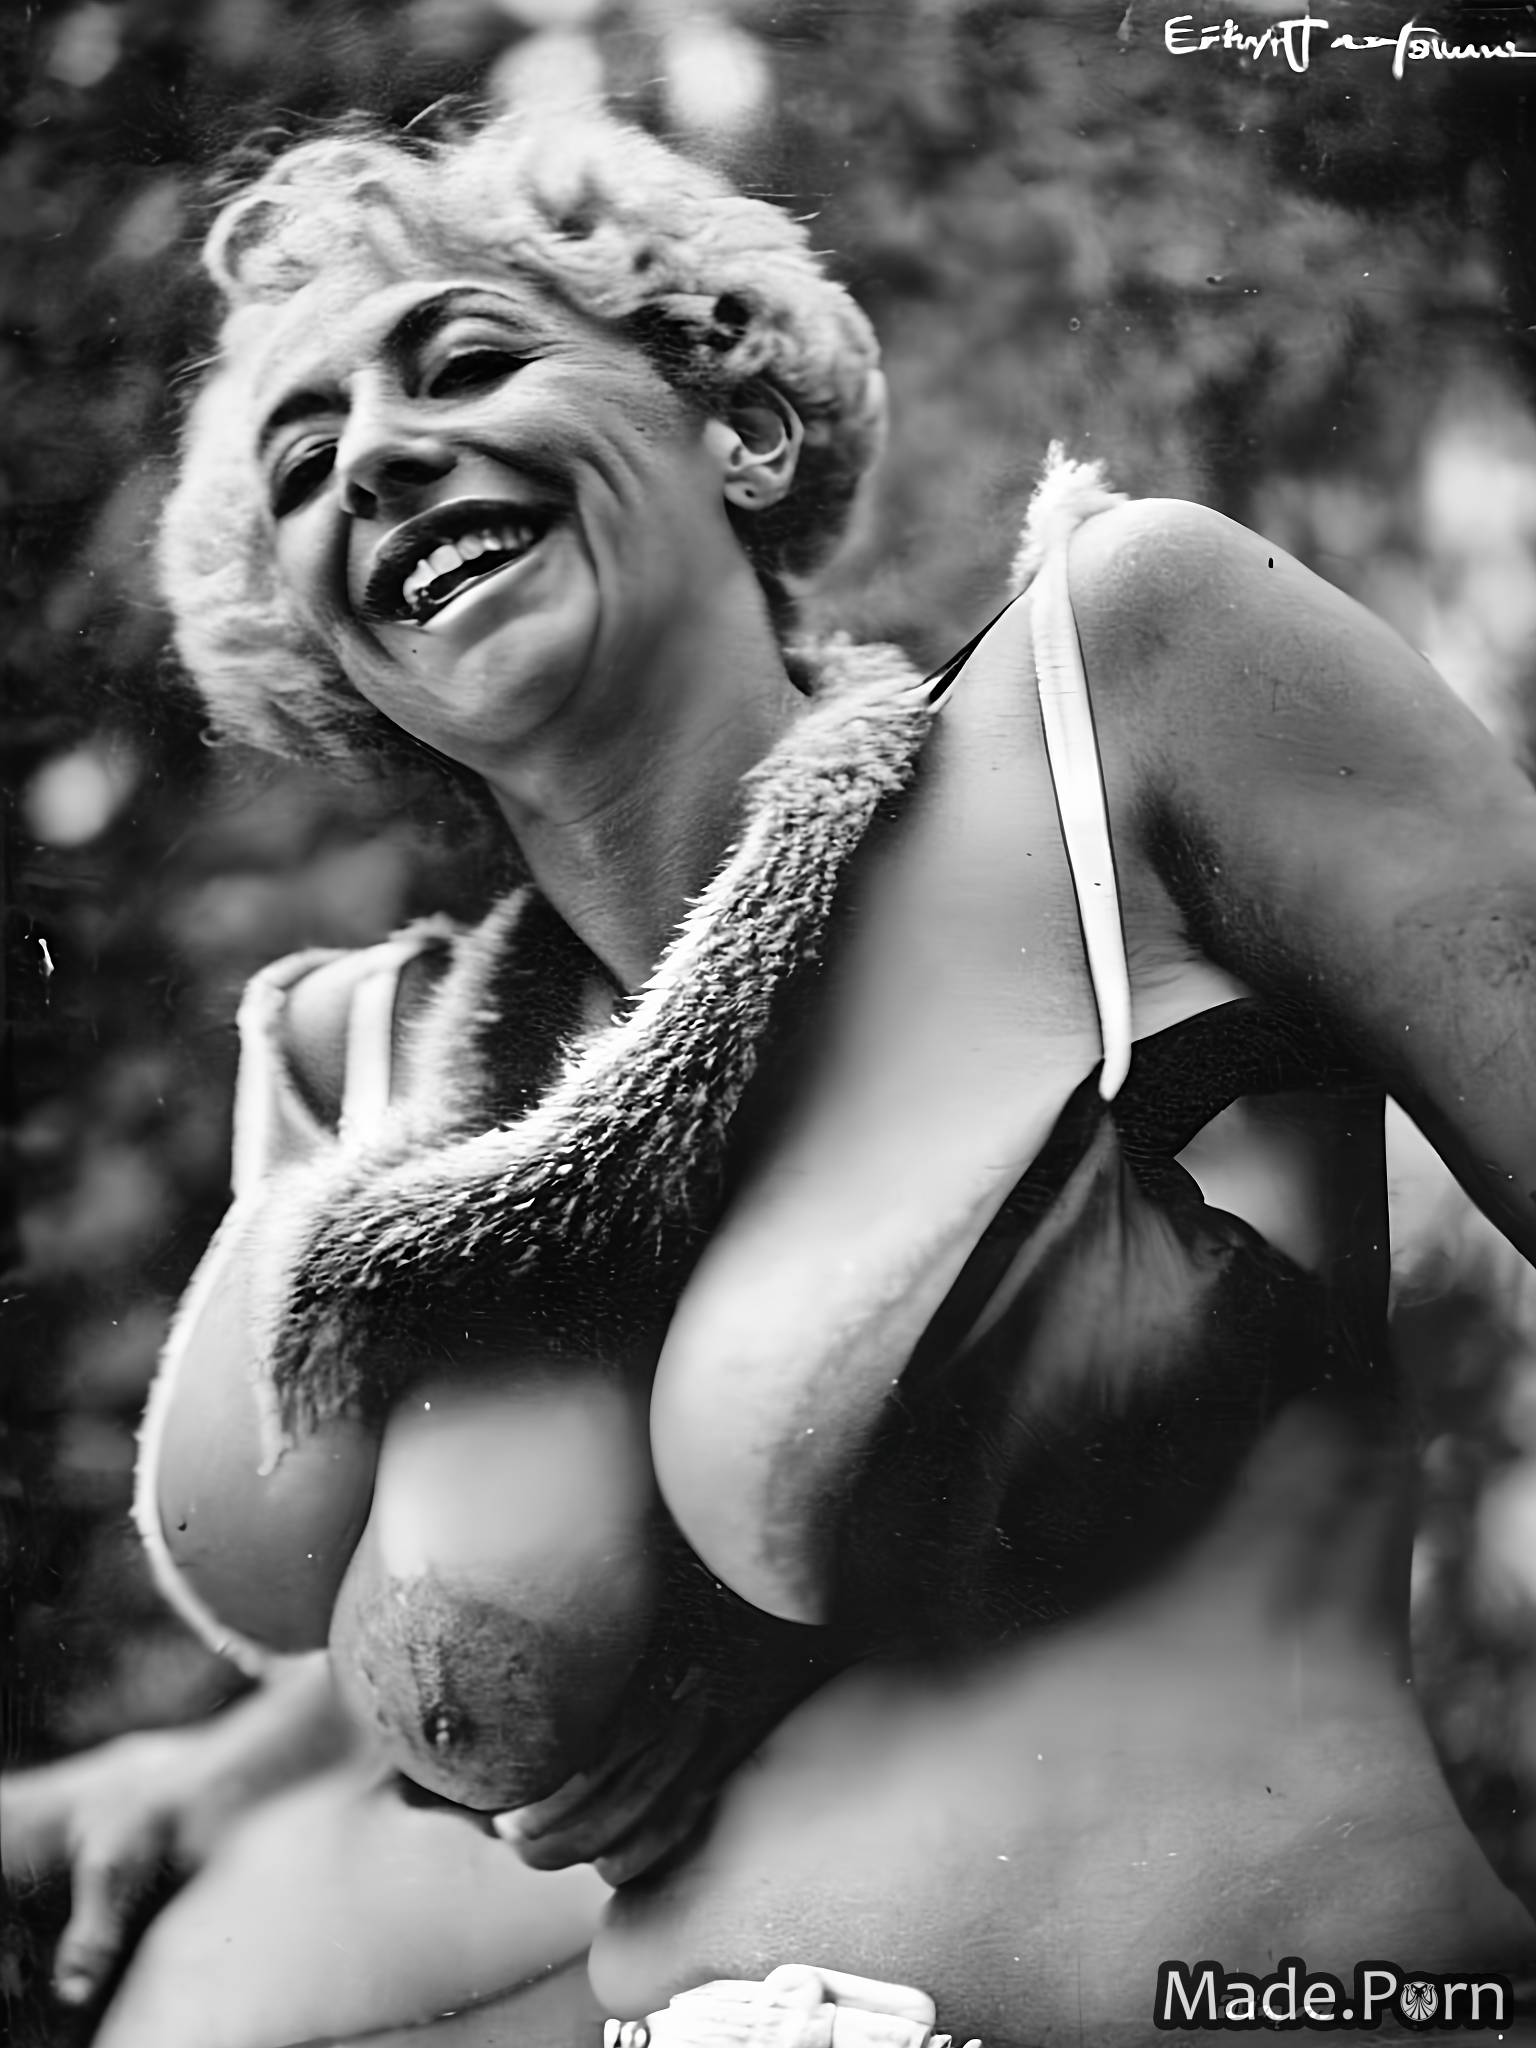 Vintage Black Saggy - Porn image of 50 fur laughing Vintage saggy tits gigantic boobs skinny  close up created by AI